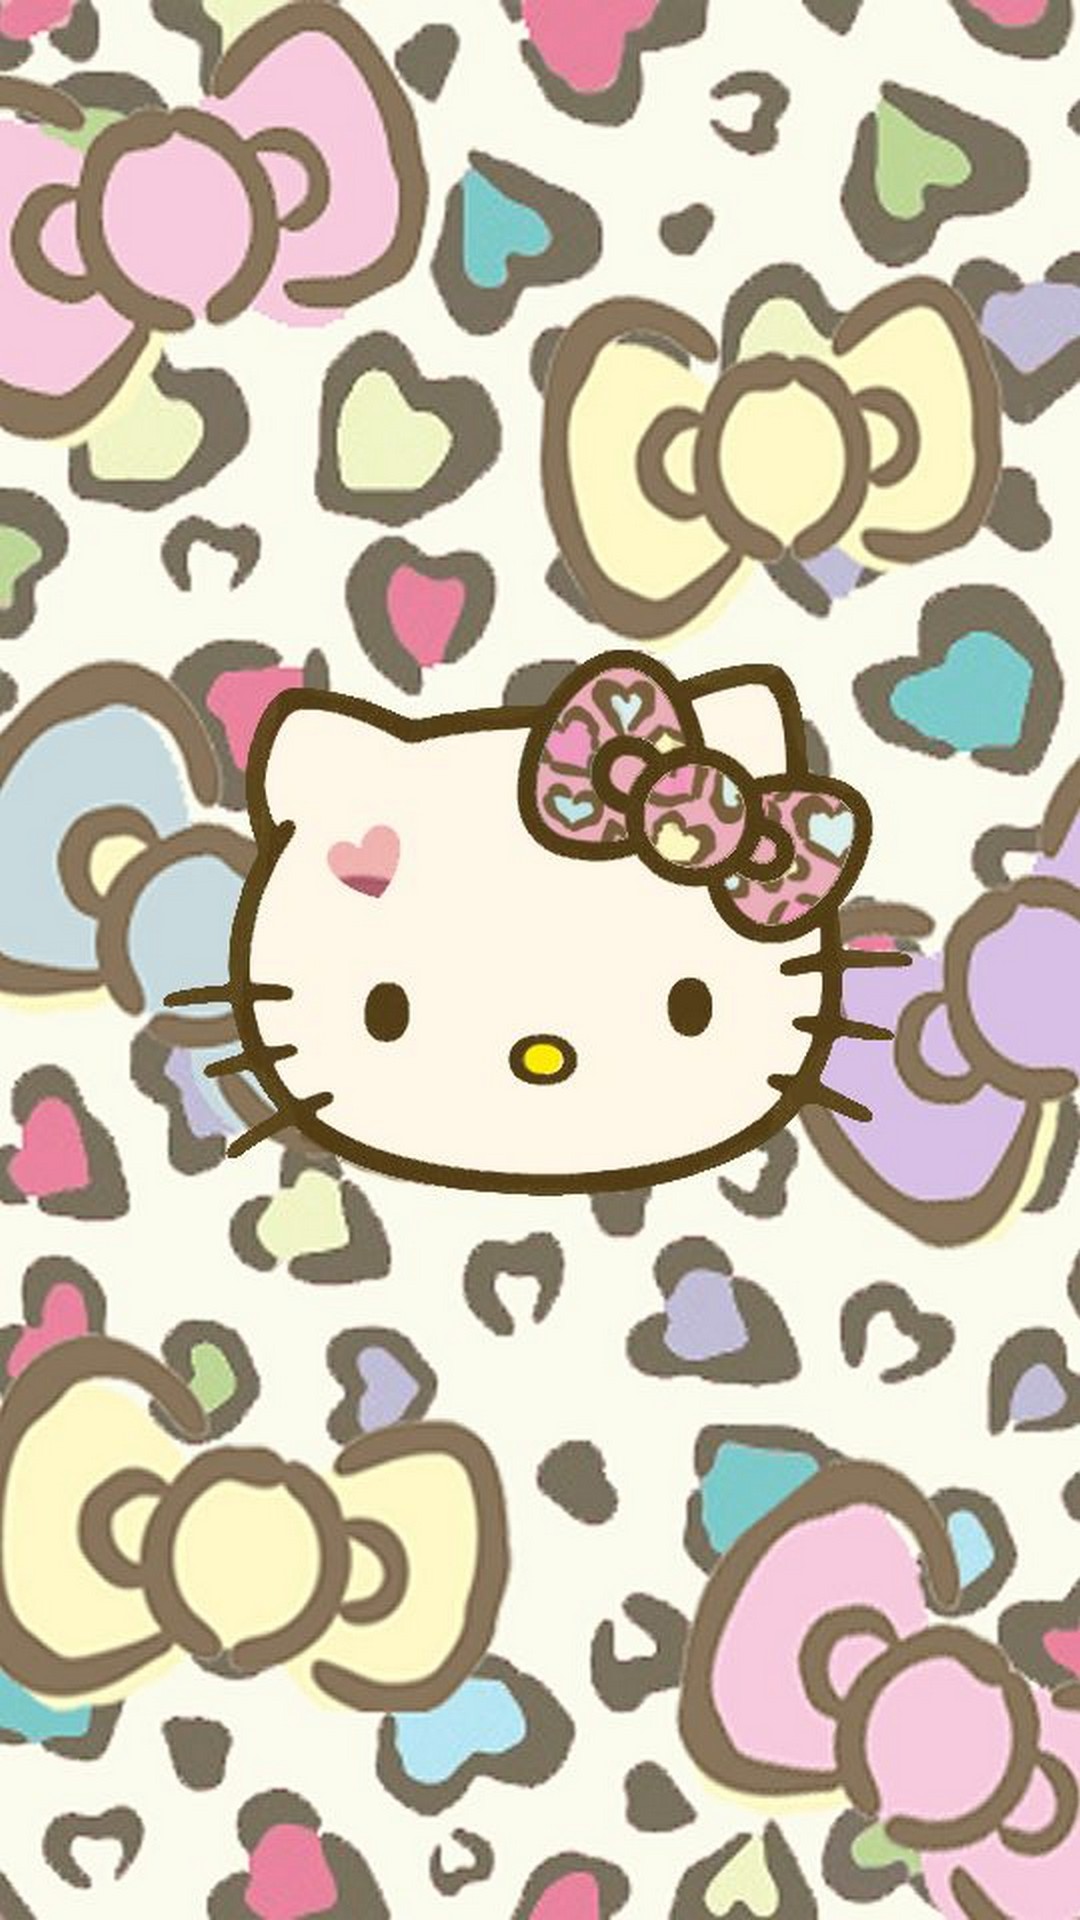 Hello Kitty Pictures Wallpaper iPhone with resolution 1080X1920 pixel. You can make this wallpaper for your iPhone 5, 6, 7, 8, X backgrounds, Mobile Screensaver, or iPad Lock Screen